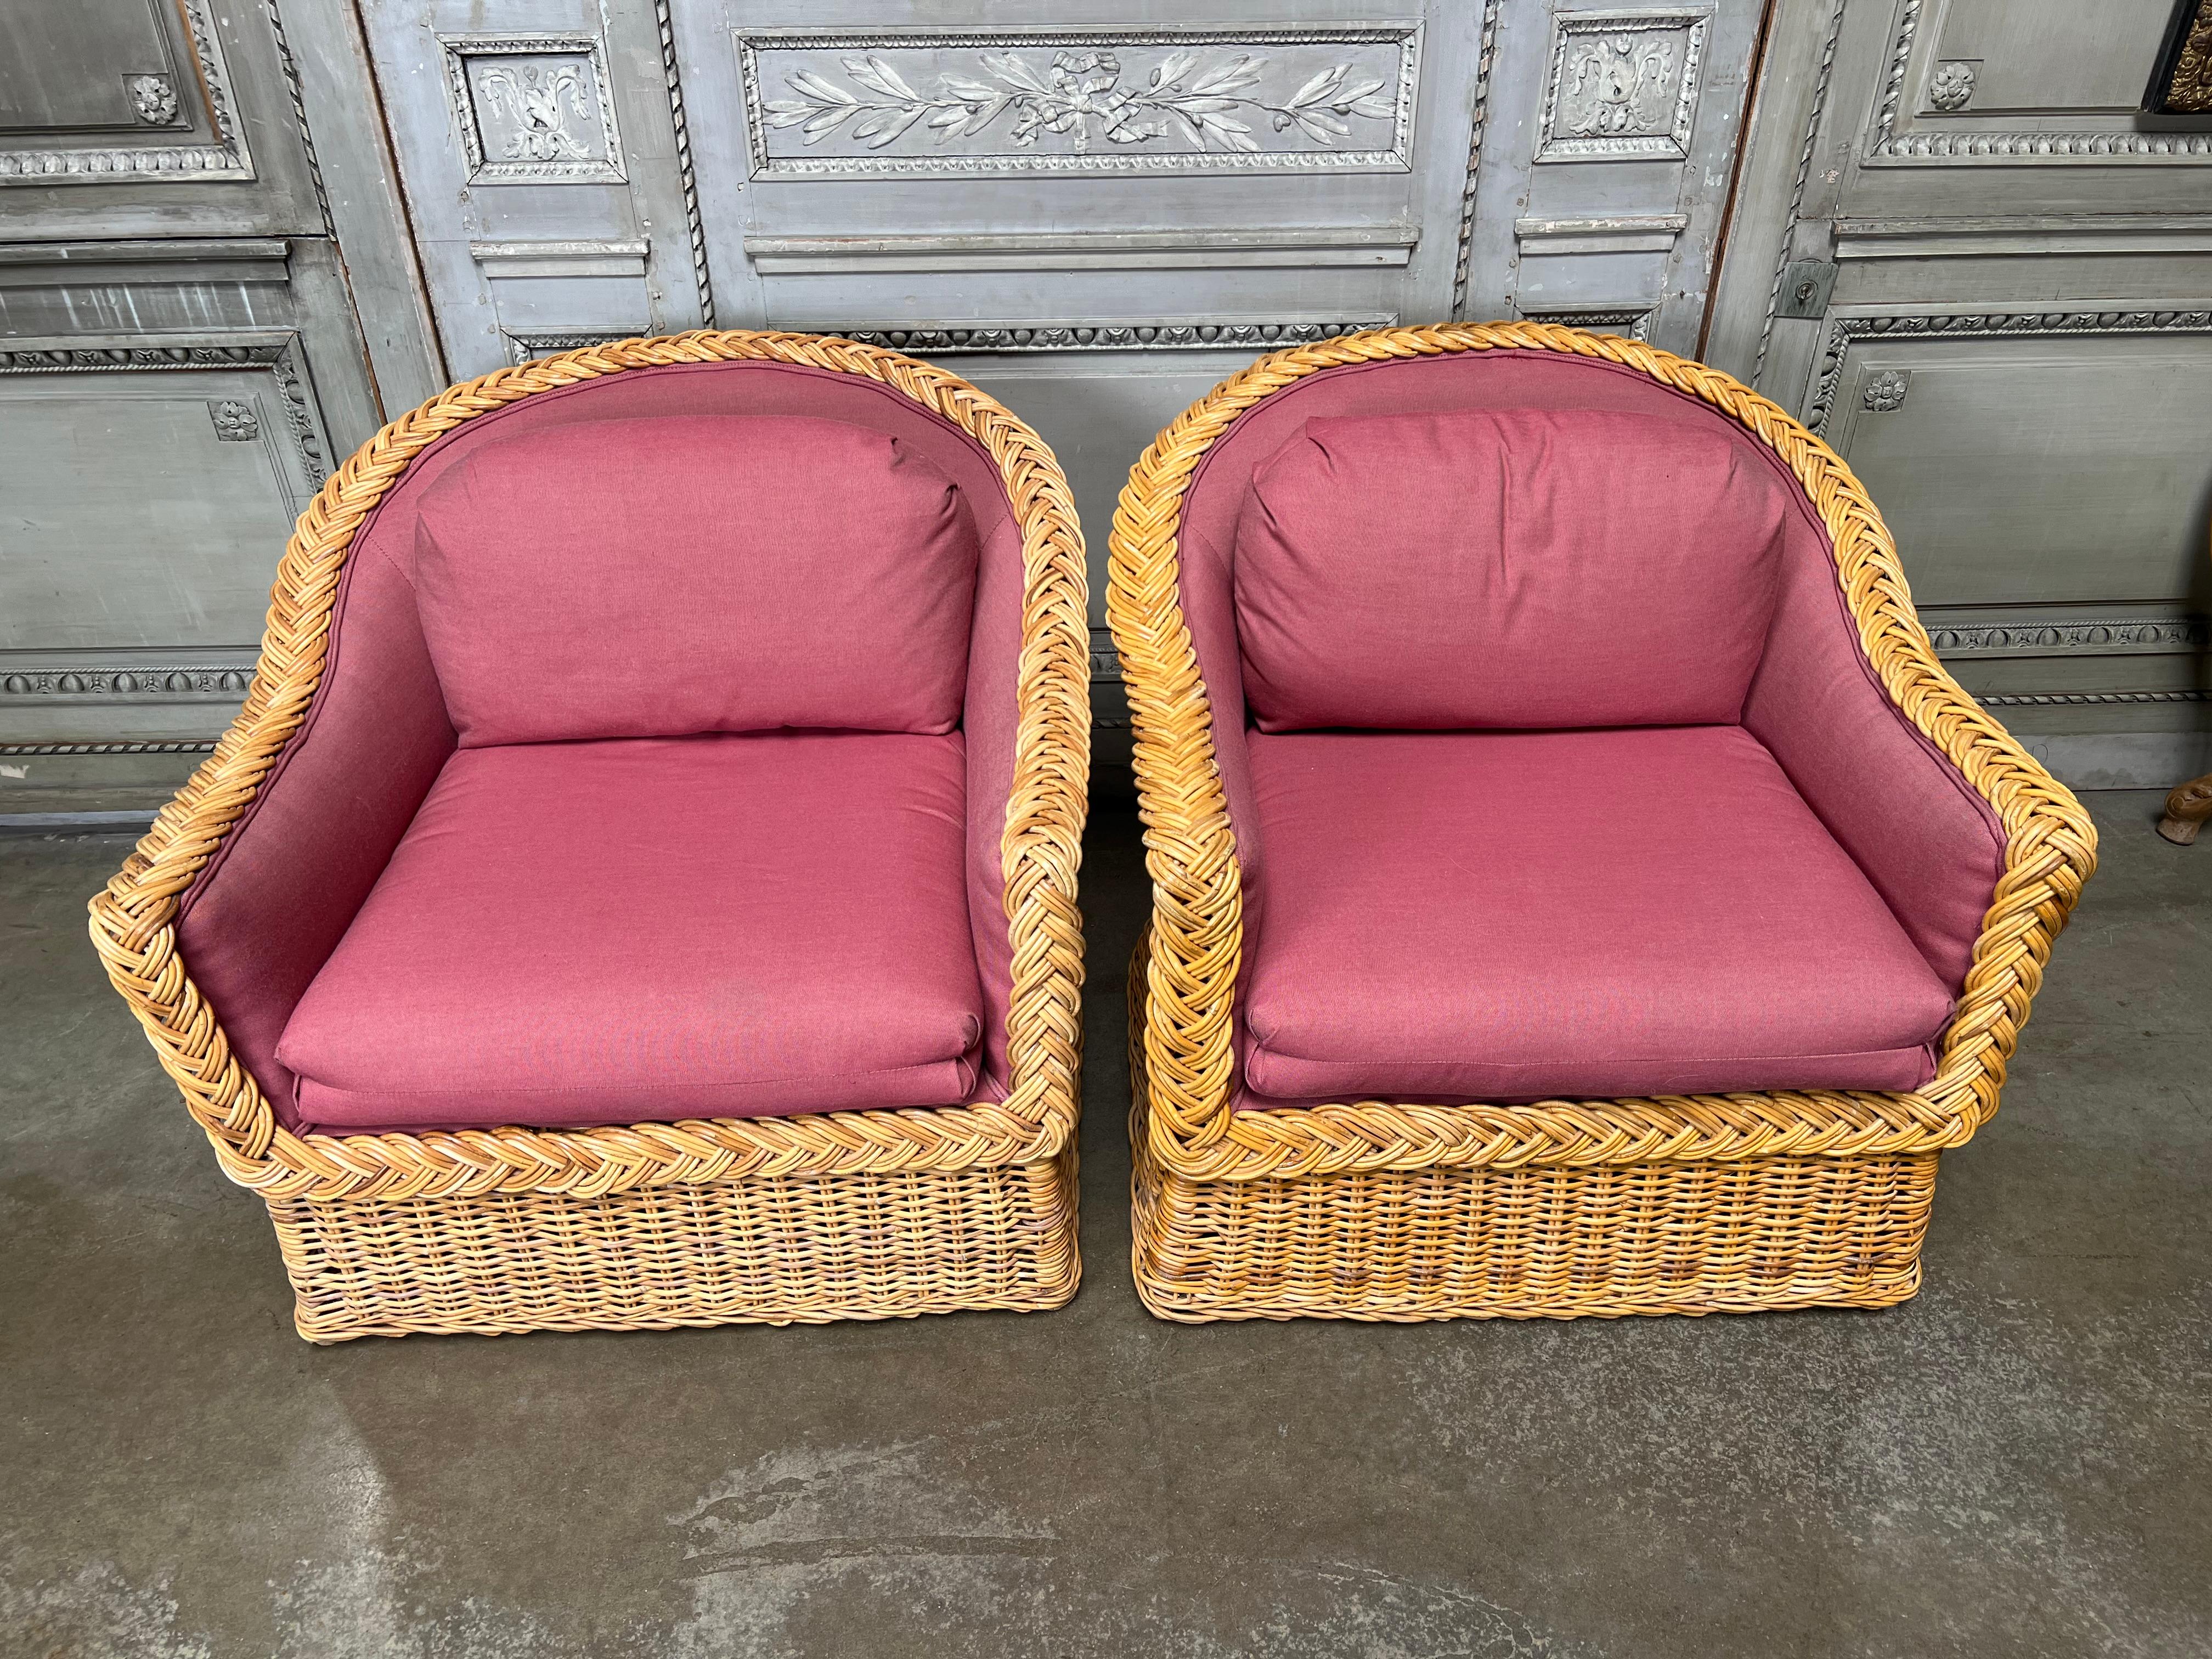 A large pair of vintage Wicker Works club chairs from the 1980s. These comfortable chairs are upholstered in clean usable fabric, but we didn't reupholster them. They are in nice condition and one is slightly lighter than the other due to sun